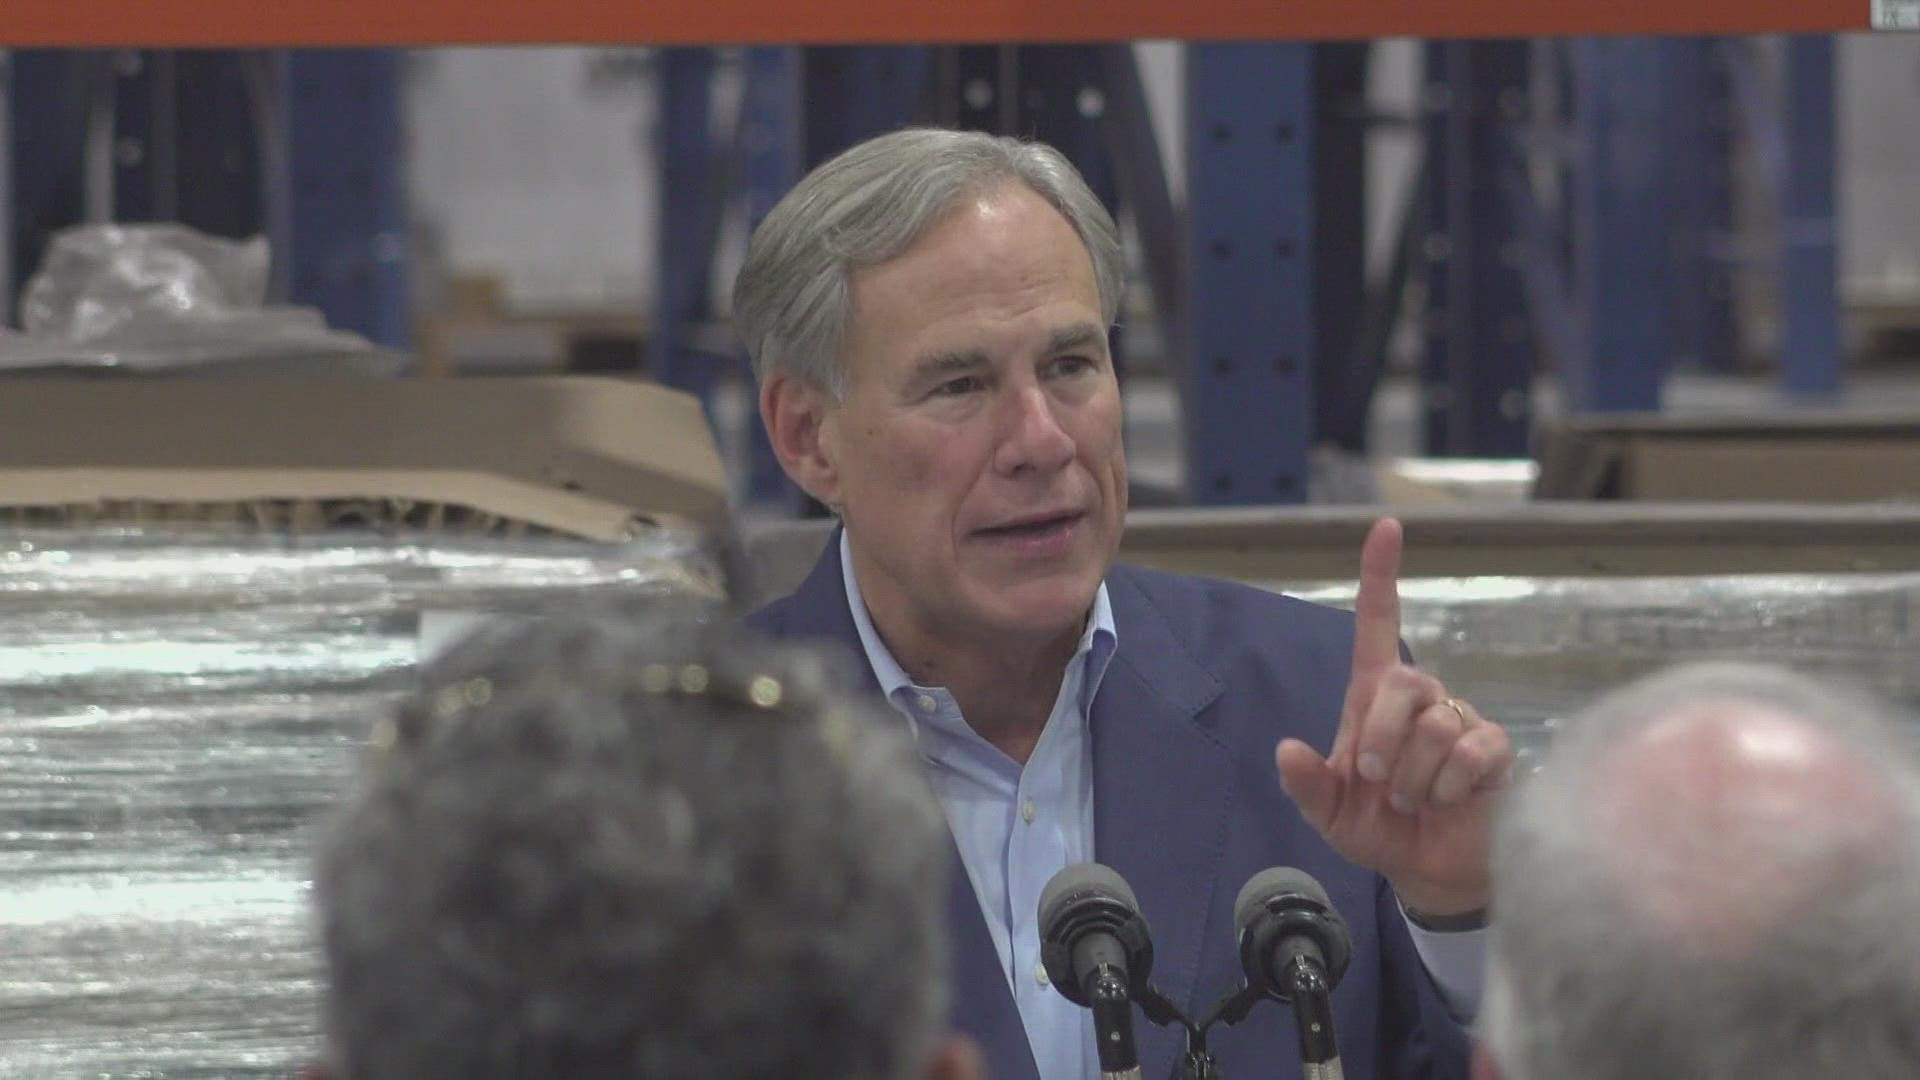 Gov. Greg Abbott was at the ribbon cutting at East Penn Manufacturing Company in Temple, Texas. Abbott said this company is an example of making a strong TX economy.